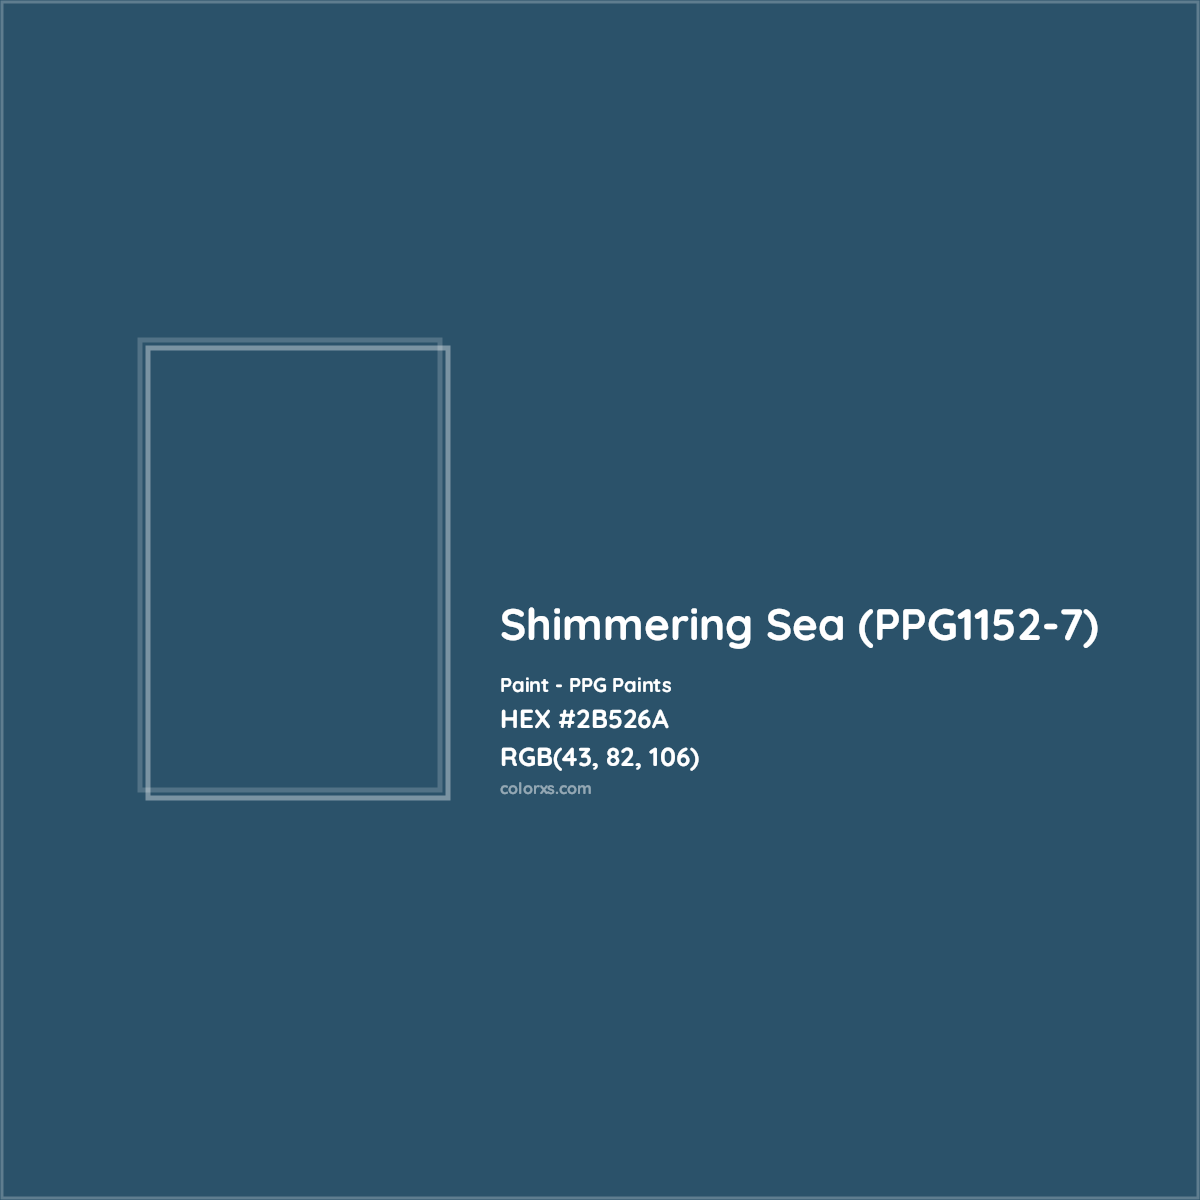 HEX #2B526A Shimmering Sea (PPG1152-7) Paint PPG Paints - Color Code